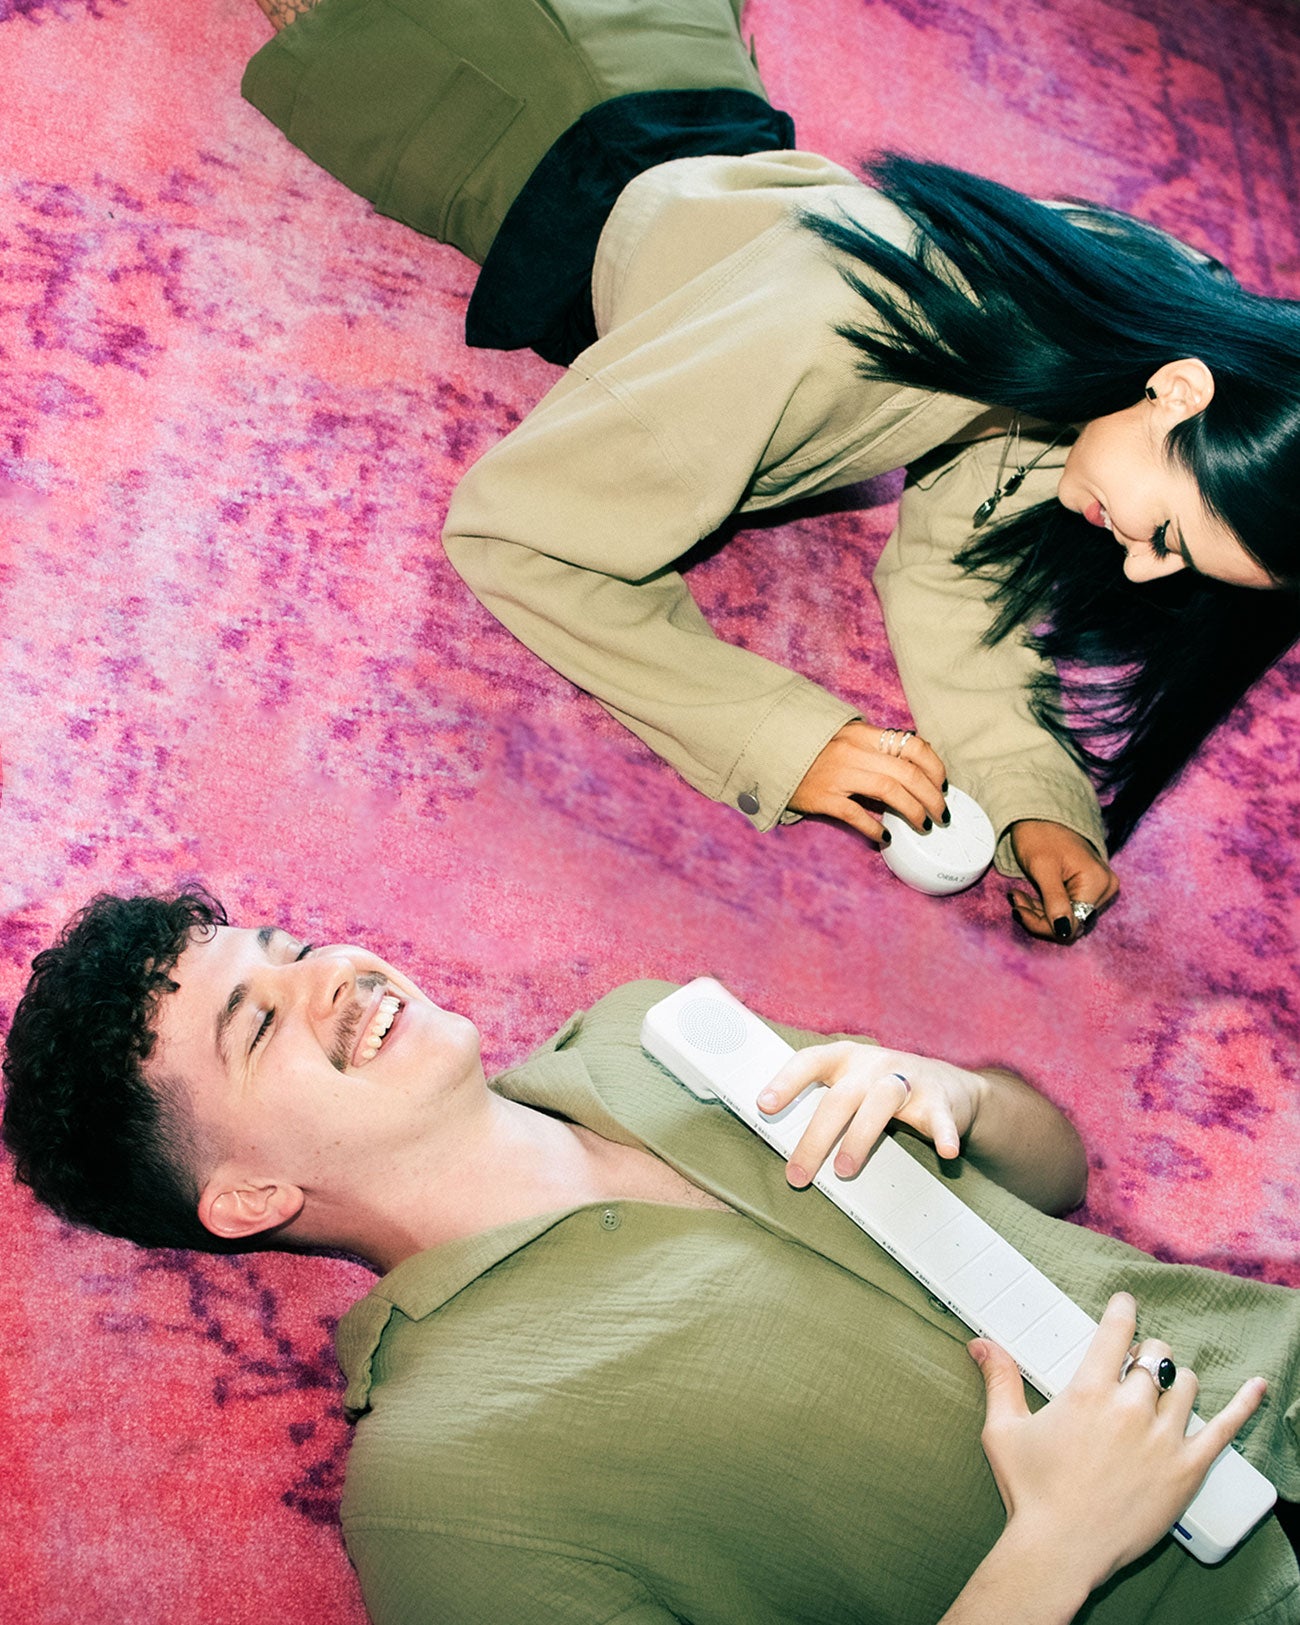 Couple lays on pink Carpet playing a white Orba and Chorda